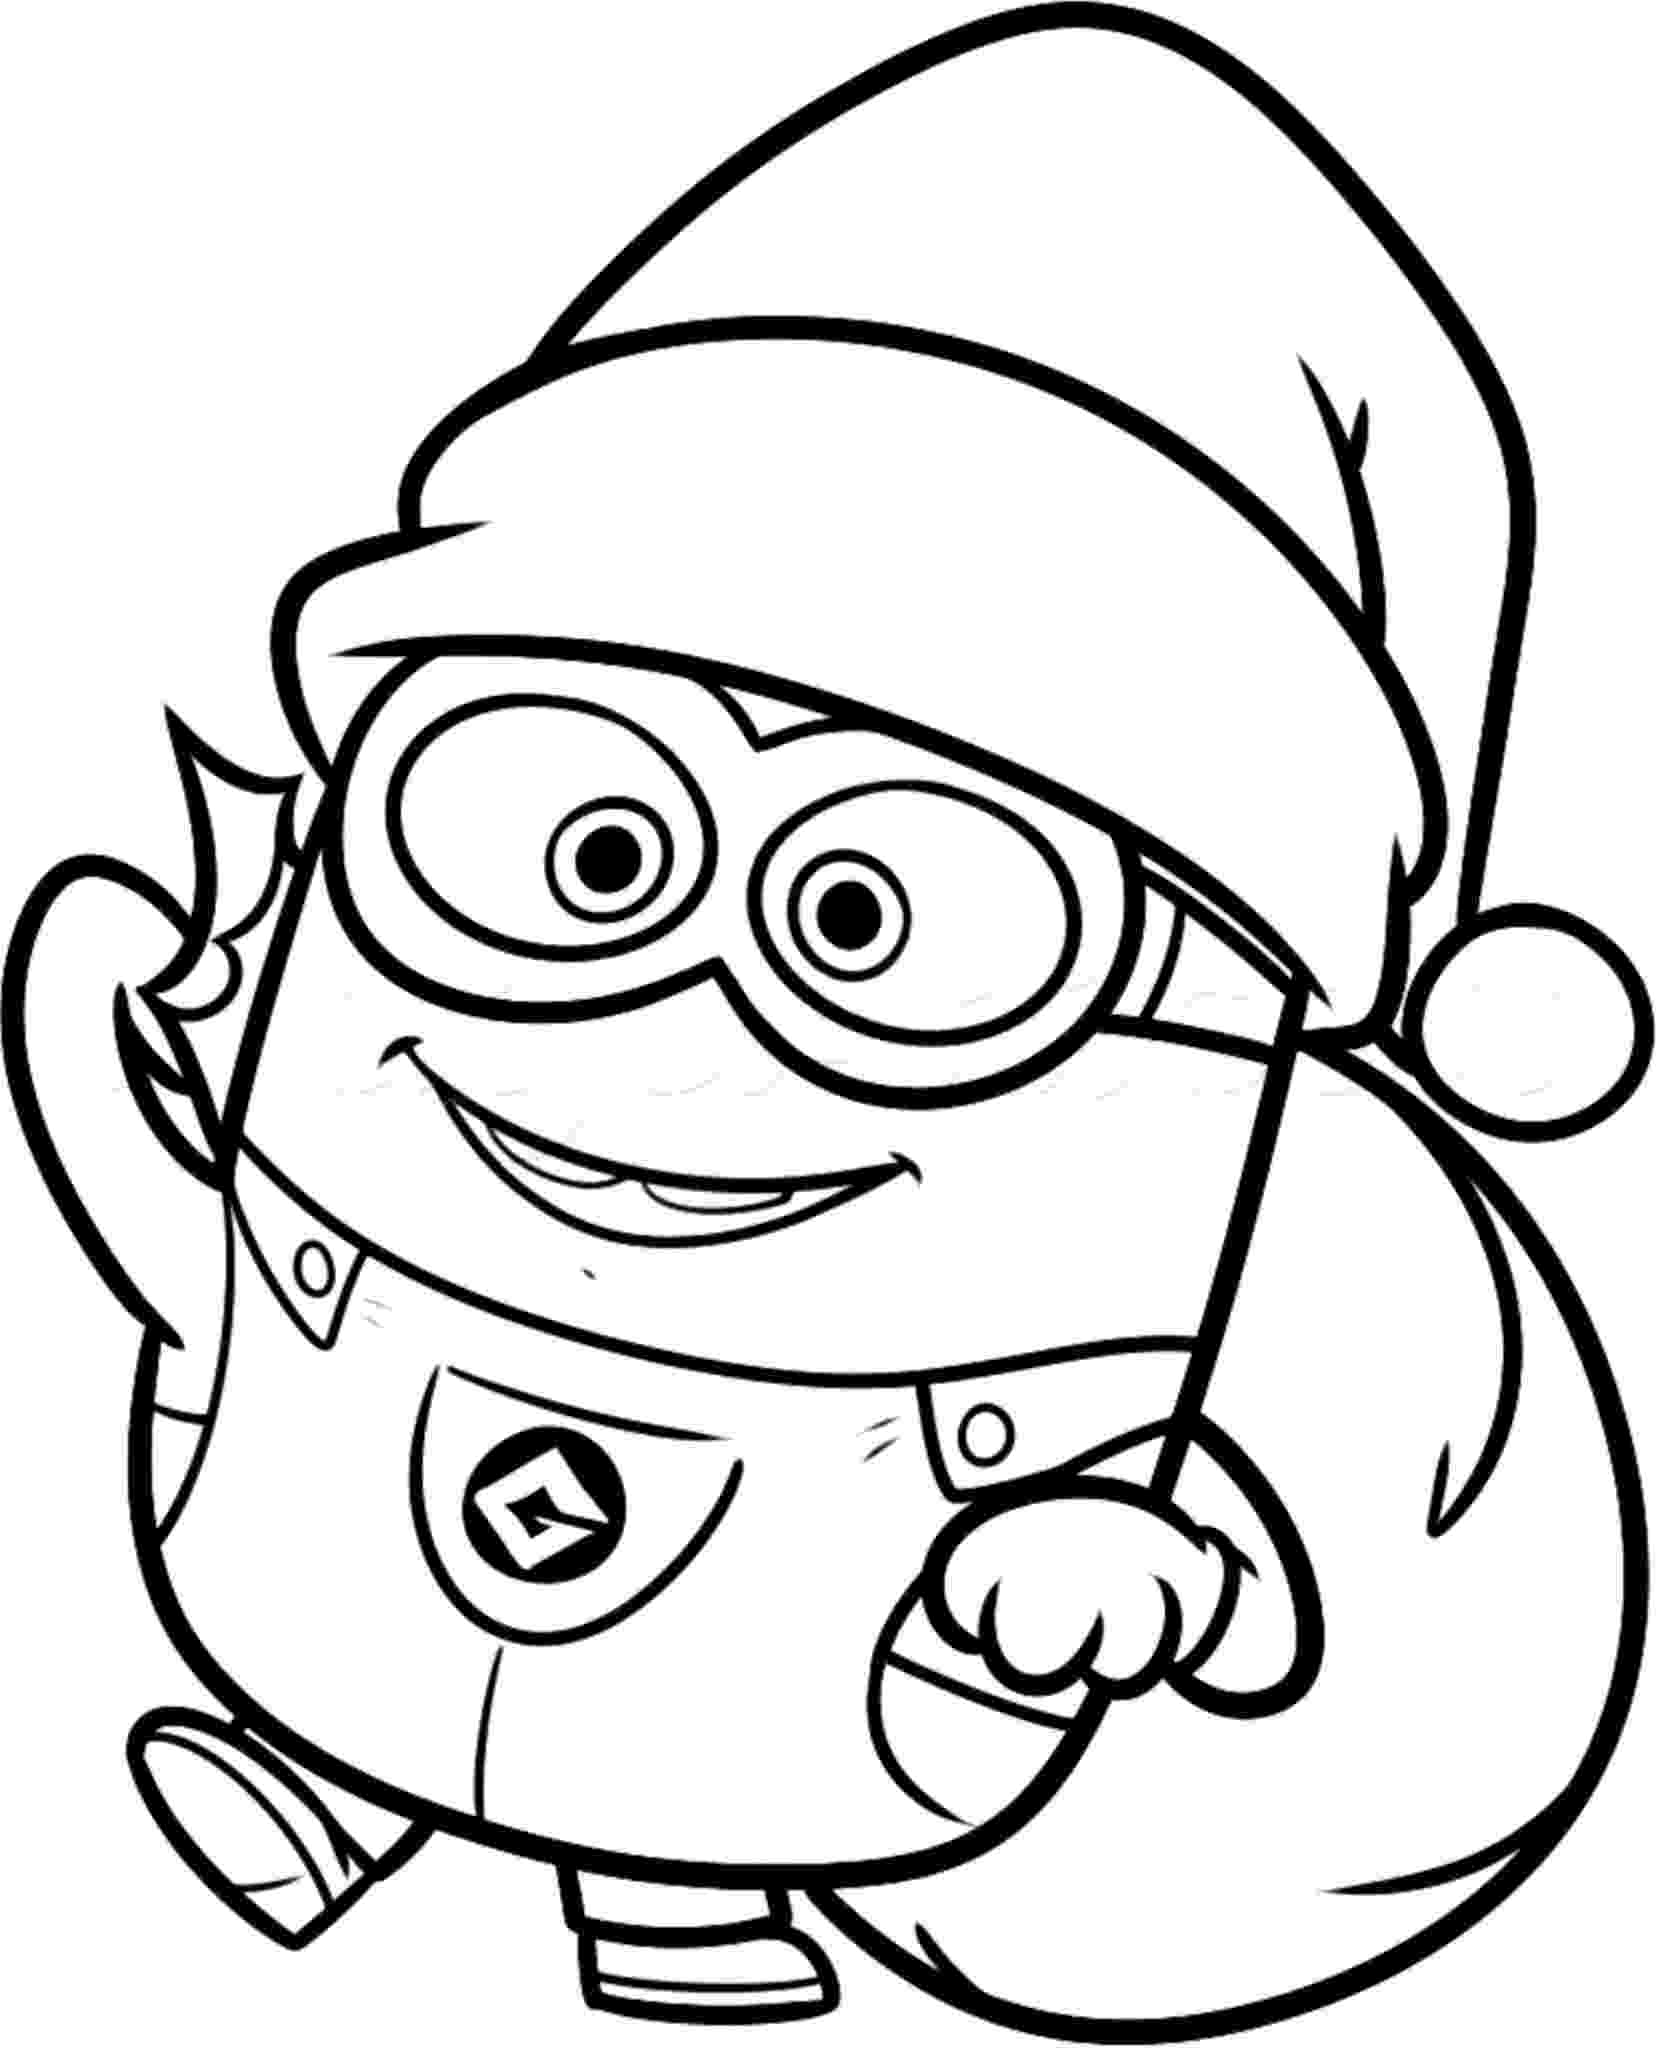 minion pictures to color and print minion coloring pages best coloring pages for kids minion color print pictures and to 